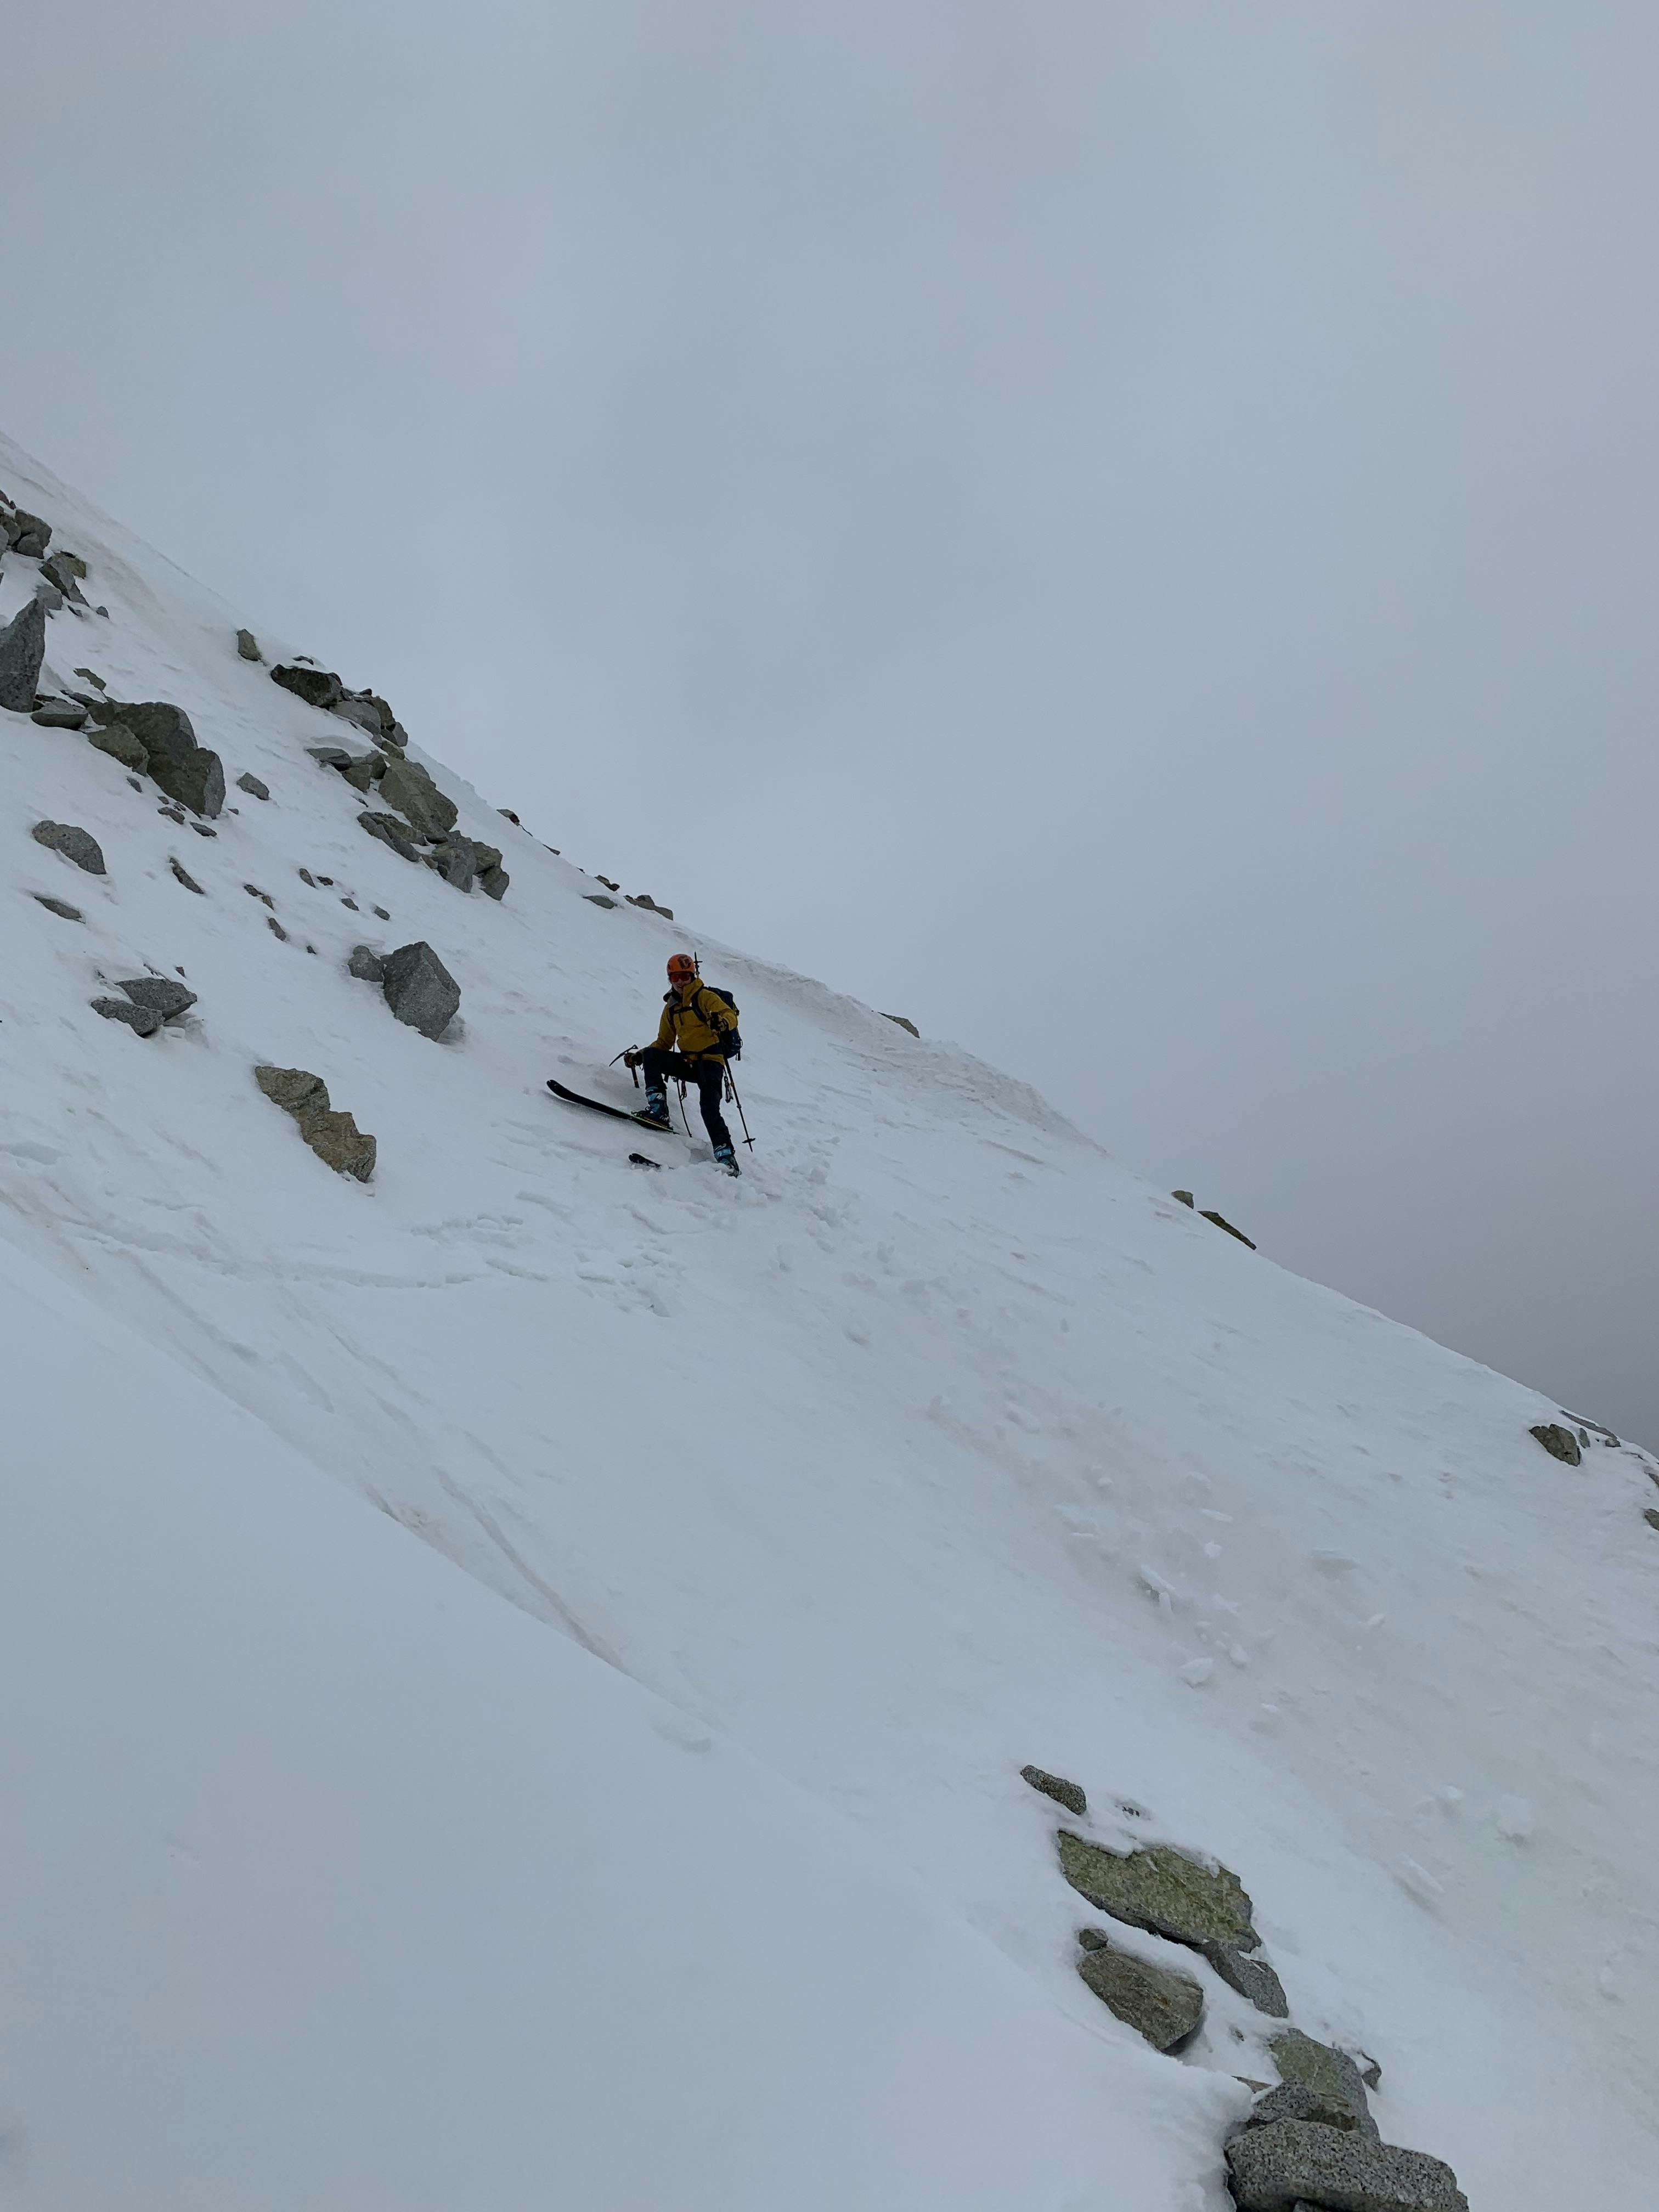 A skier at the top of a rocky snowfield.